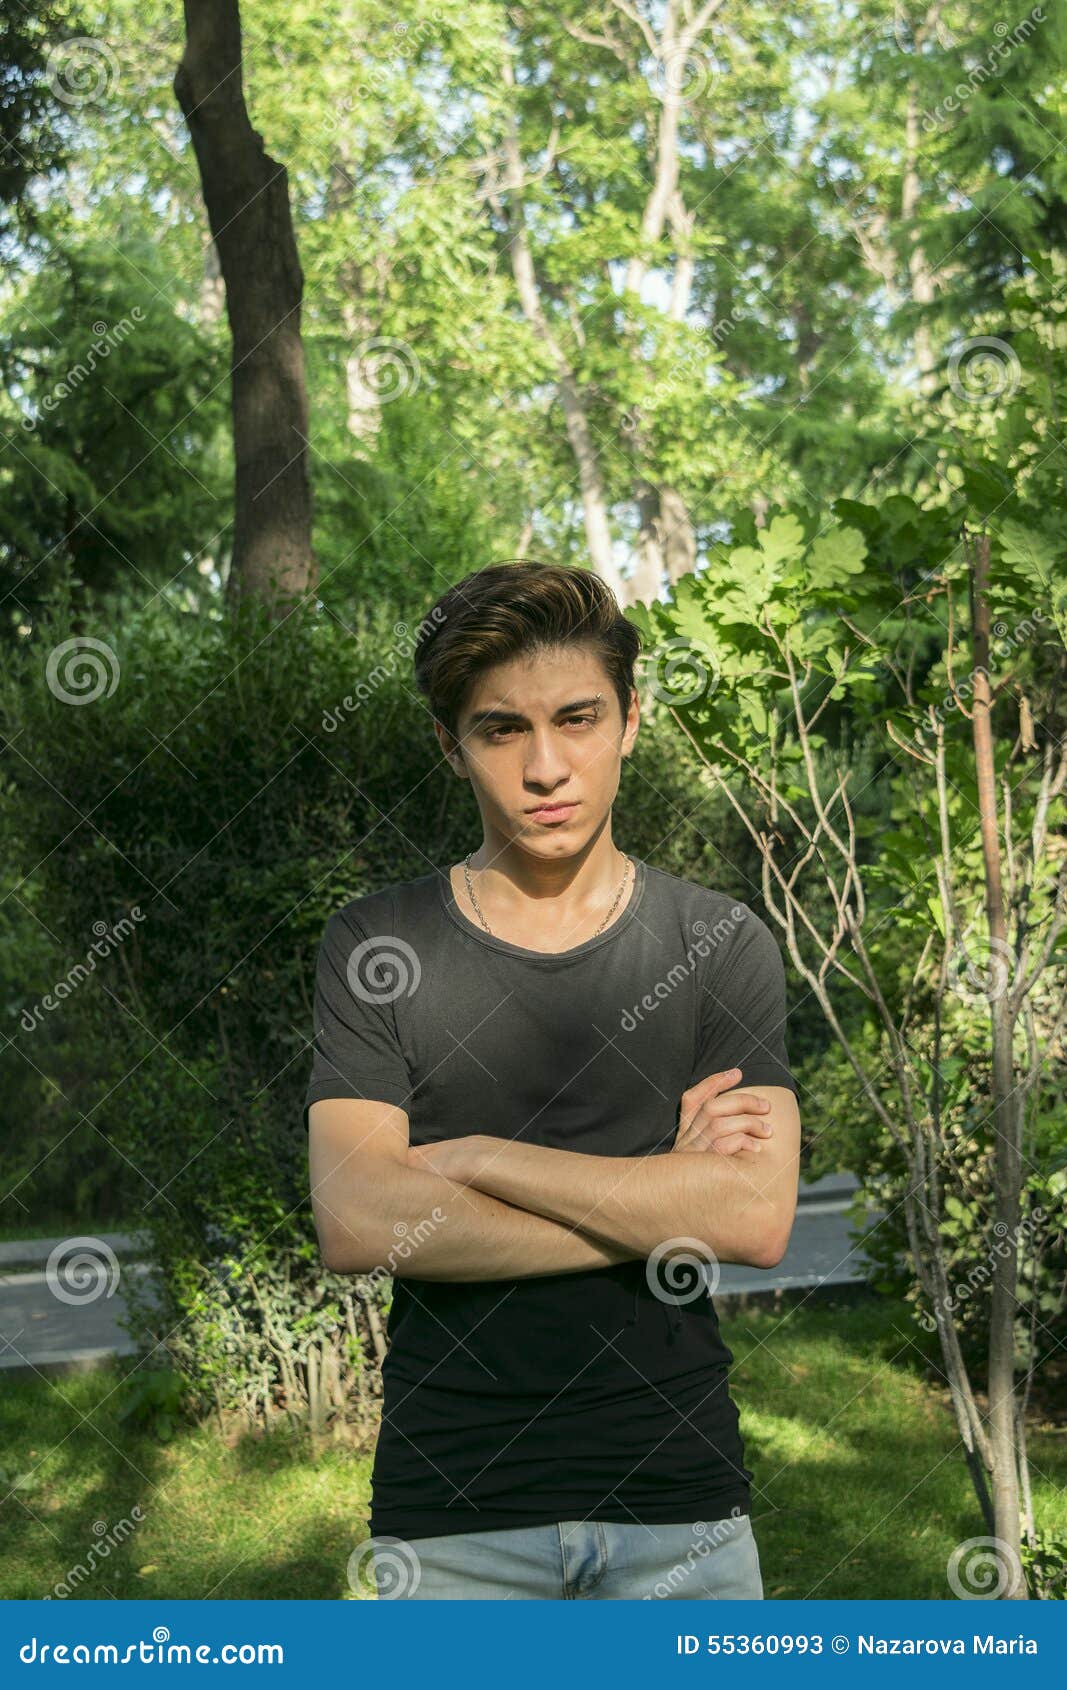 Teen guy stock image. Image of hand, meadow, park, cheerful - 55360993